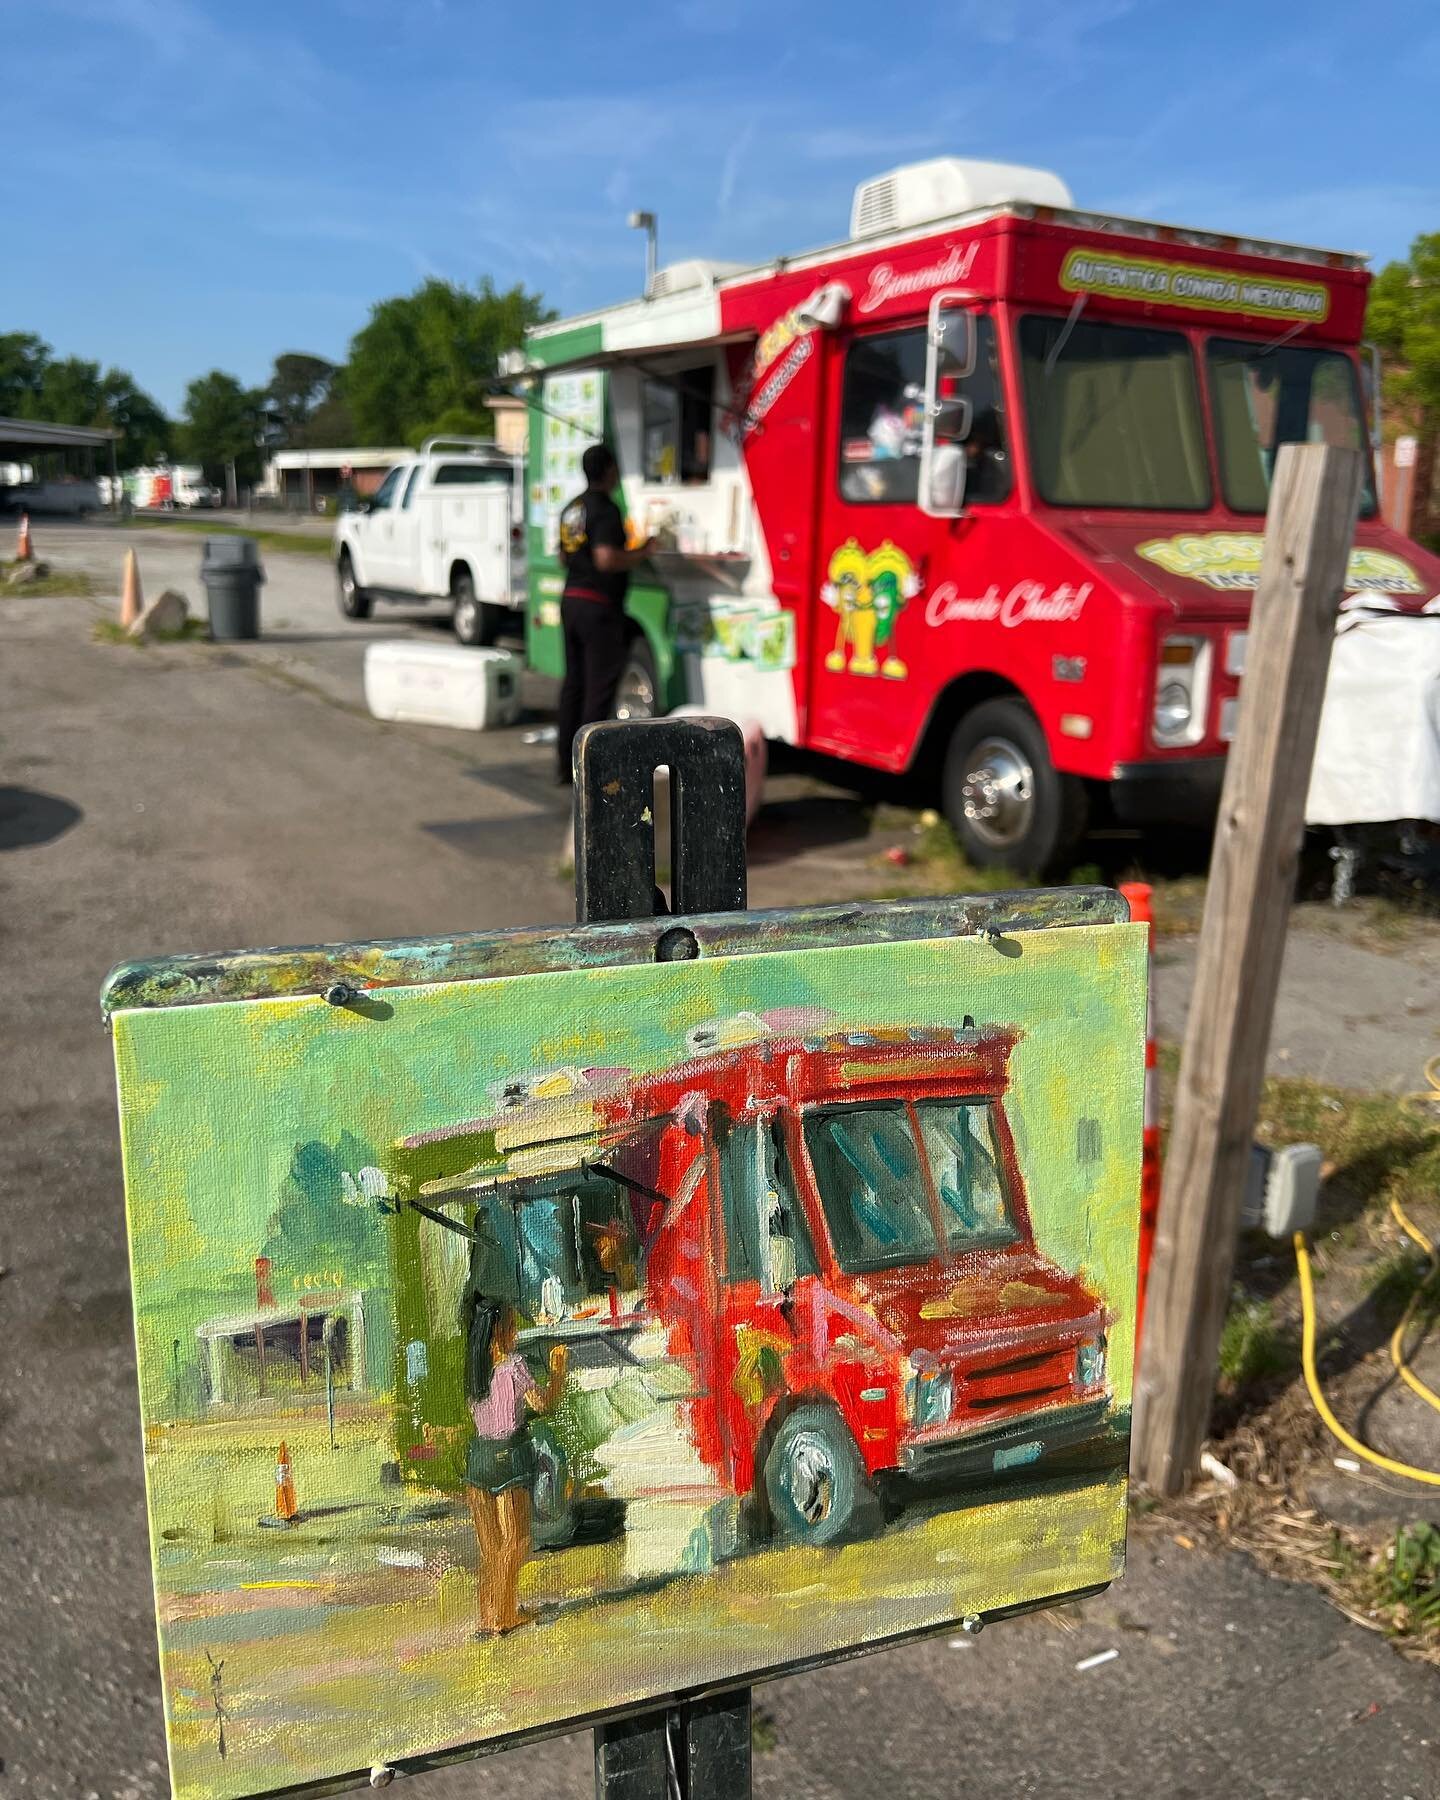 Finished up this Taco truck and off to another place to paint! #oilpainter #pleinair #pleinairpainting #outdoorpainting #pleinairmag #paintingadventures #outdoorpainter #painter #outdoorpainting #urbanpleinair #urbanpleinairpainting #tacotruck #plein